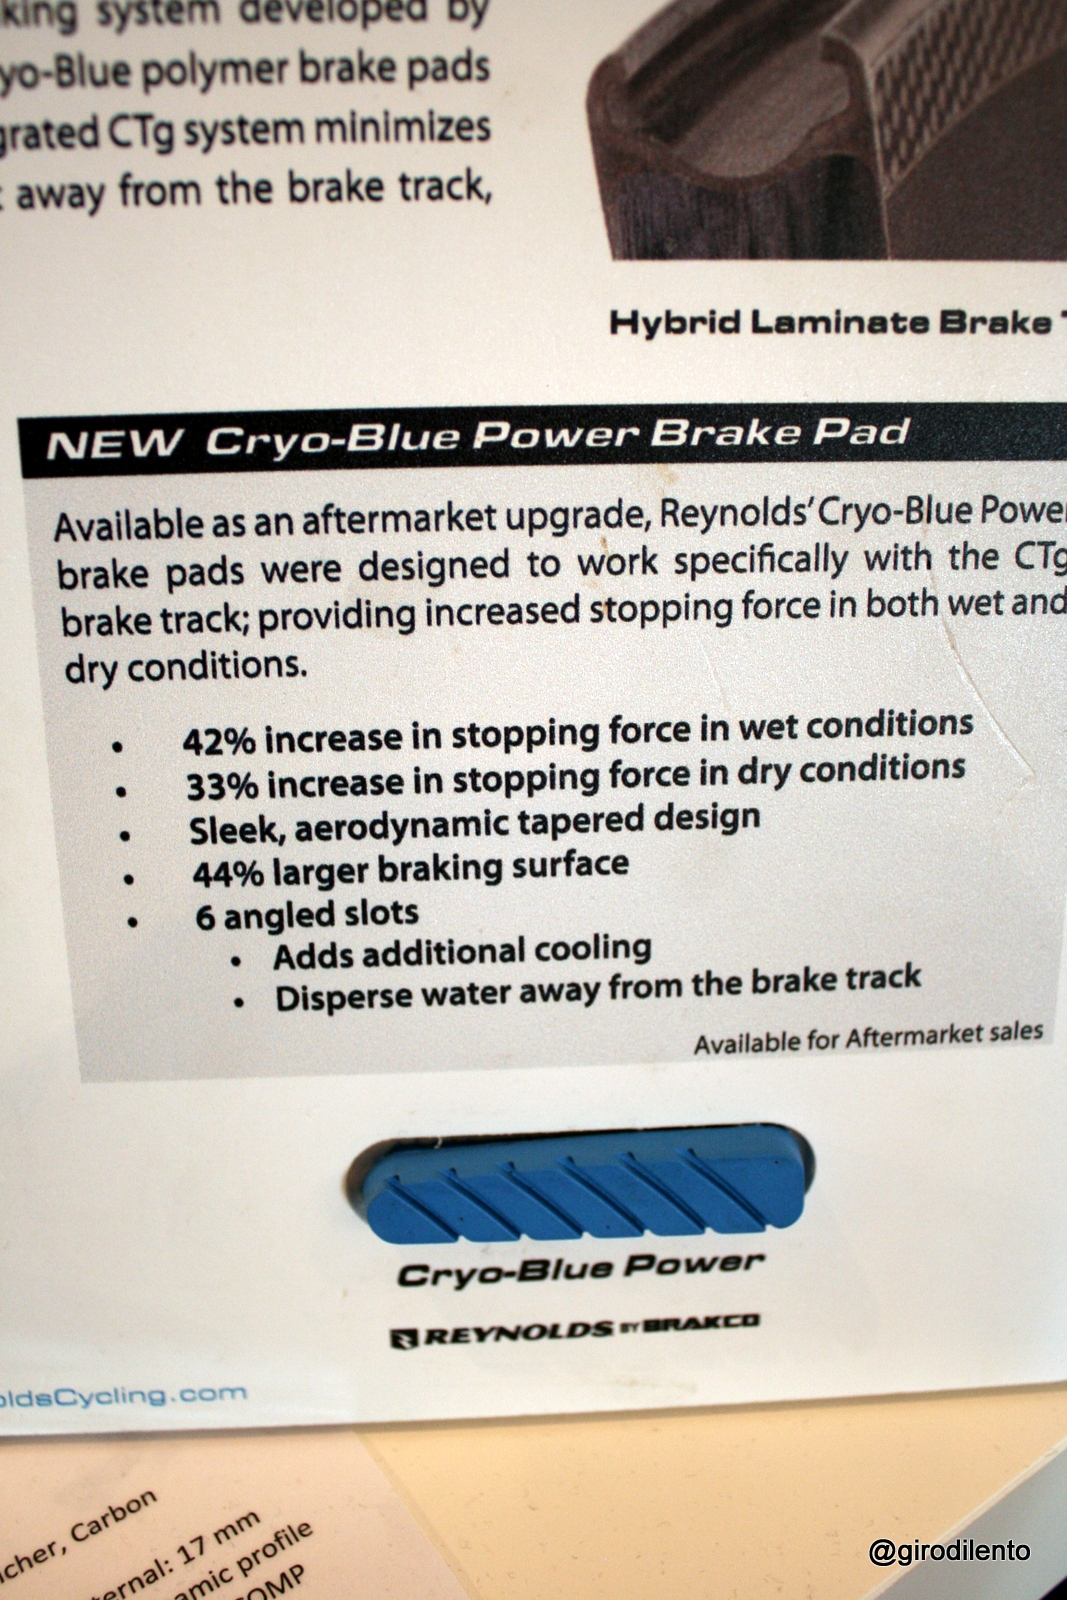 New and much improved brake pads and braking for Reynolds owners....